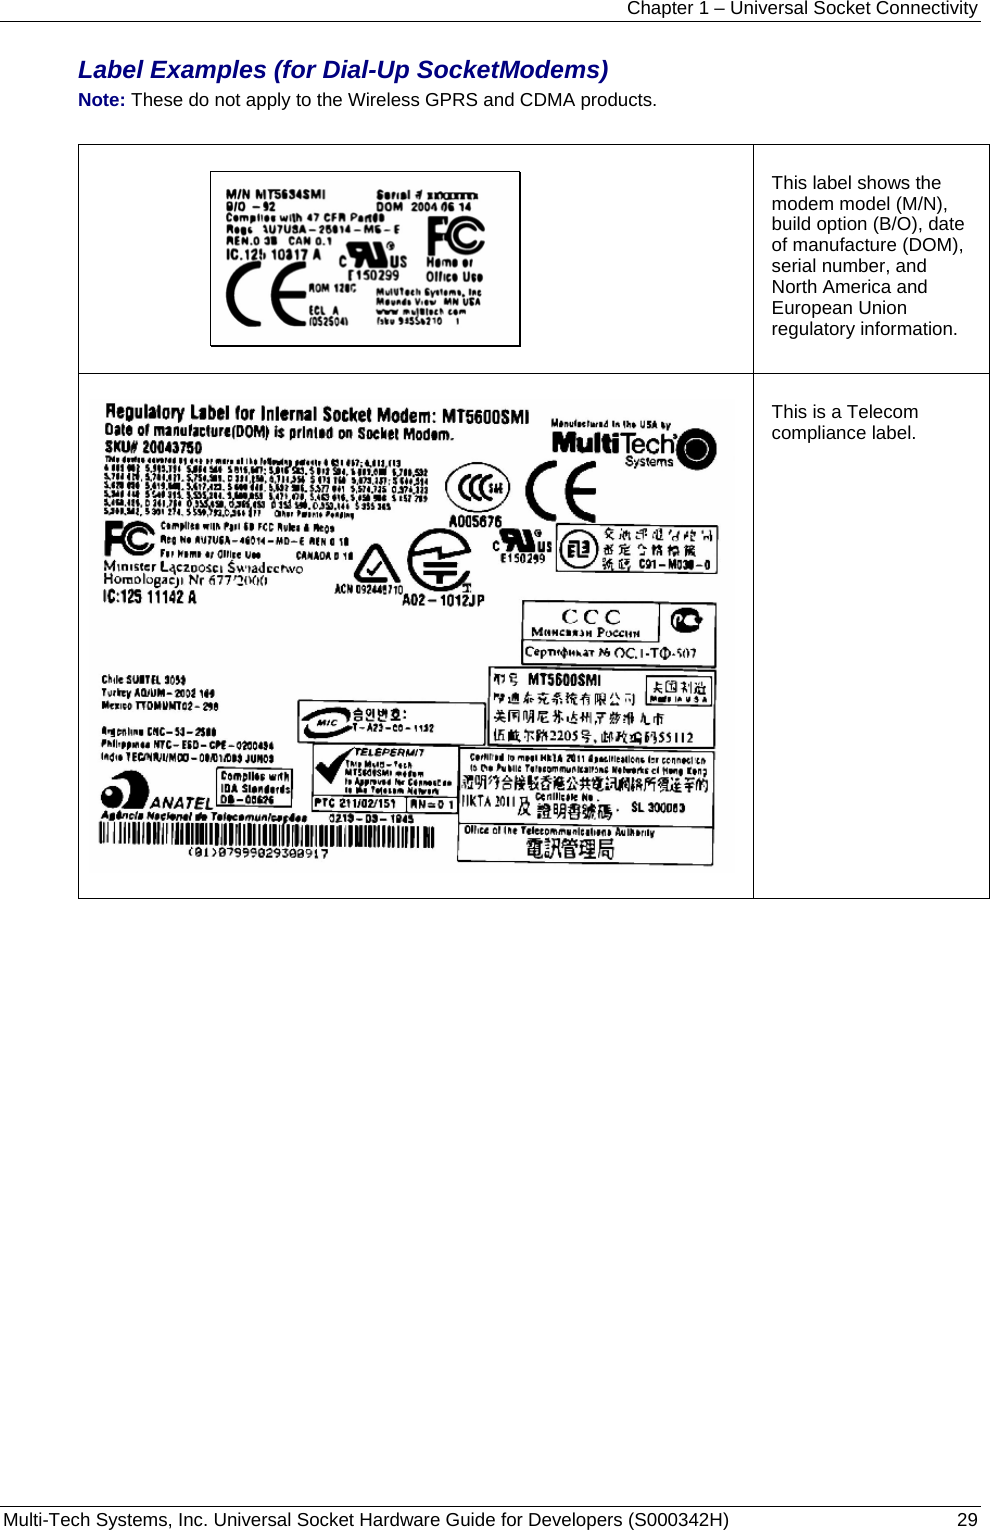 Chapter 1 – Universal Socket Connectivity Multi-Tech Systems, Inc. Universal Socket Hardware Guide for Developers (S000342H)  29  Label Examples (for Dial-Up SocketModems) Note: These do not apply to the Wireless GPRS and CDMA products.    This label shows the modem model (M/N), build option (B/O), date of manufacture (DOM), serial number, and North America and European Union regulatory information.    This is a Telecom compliance label.    